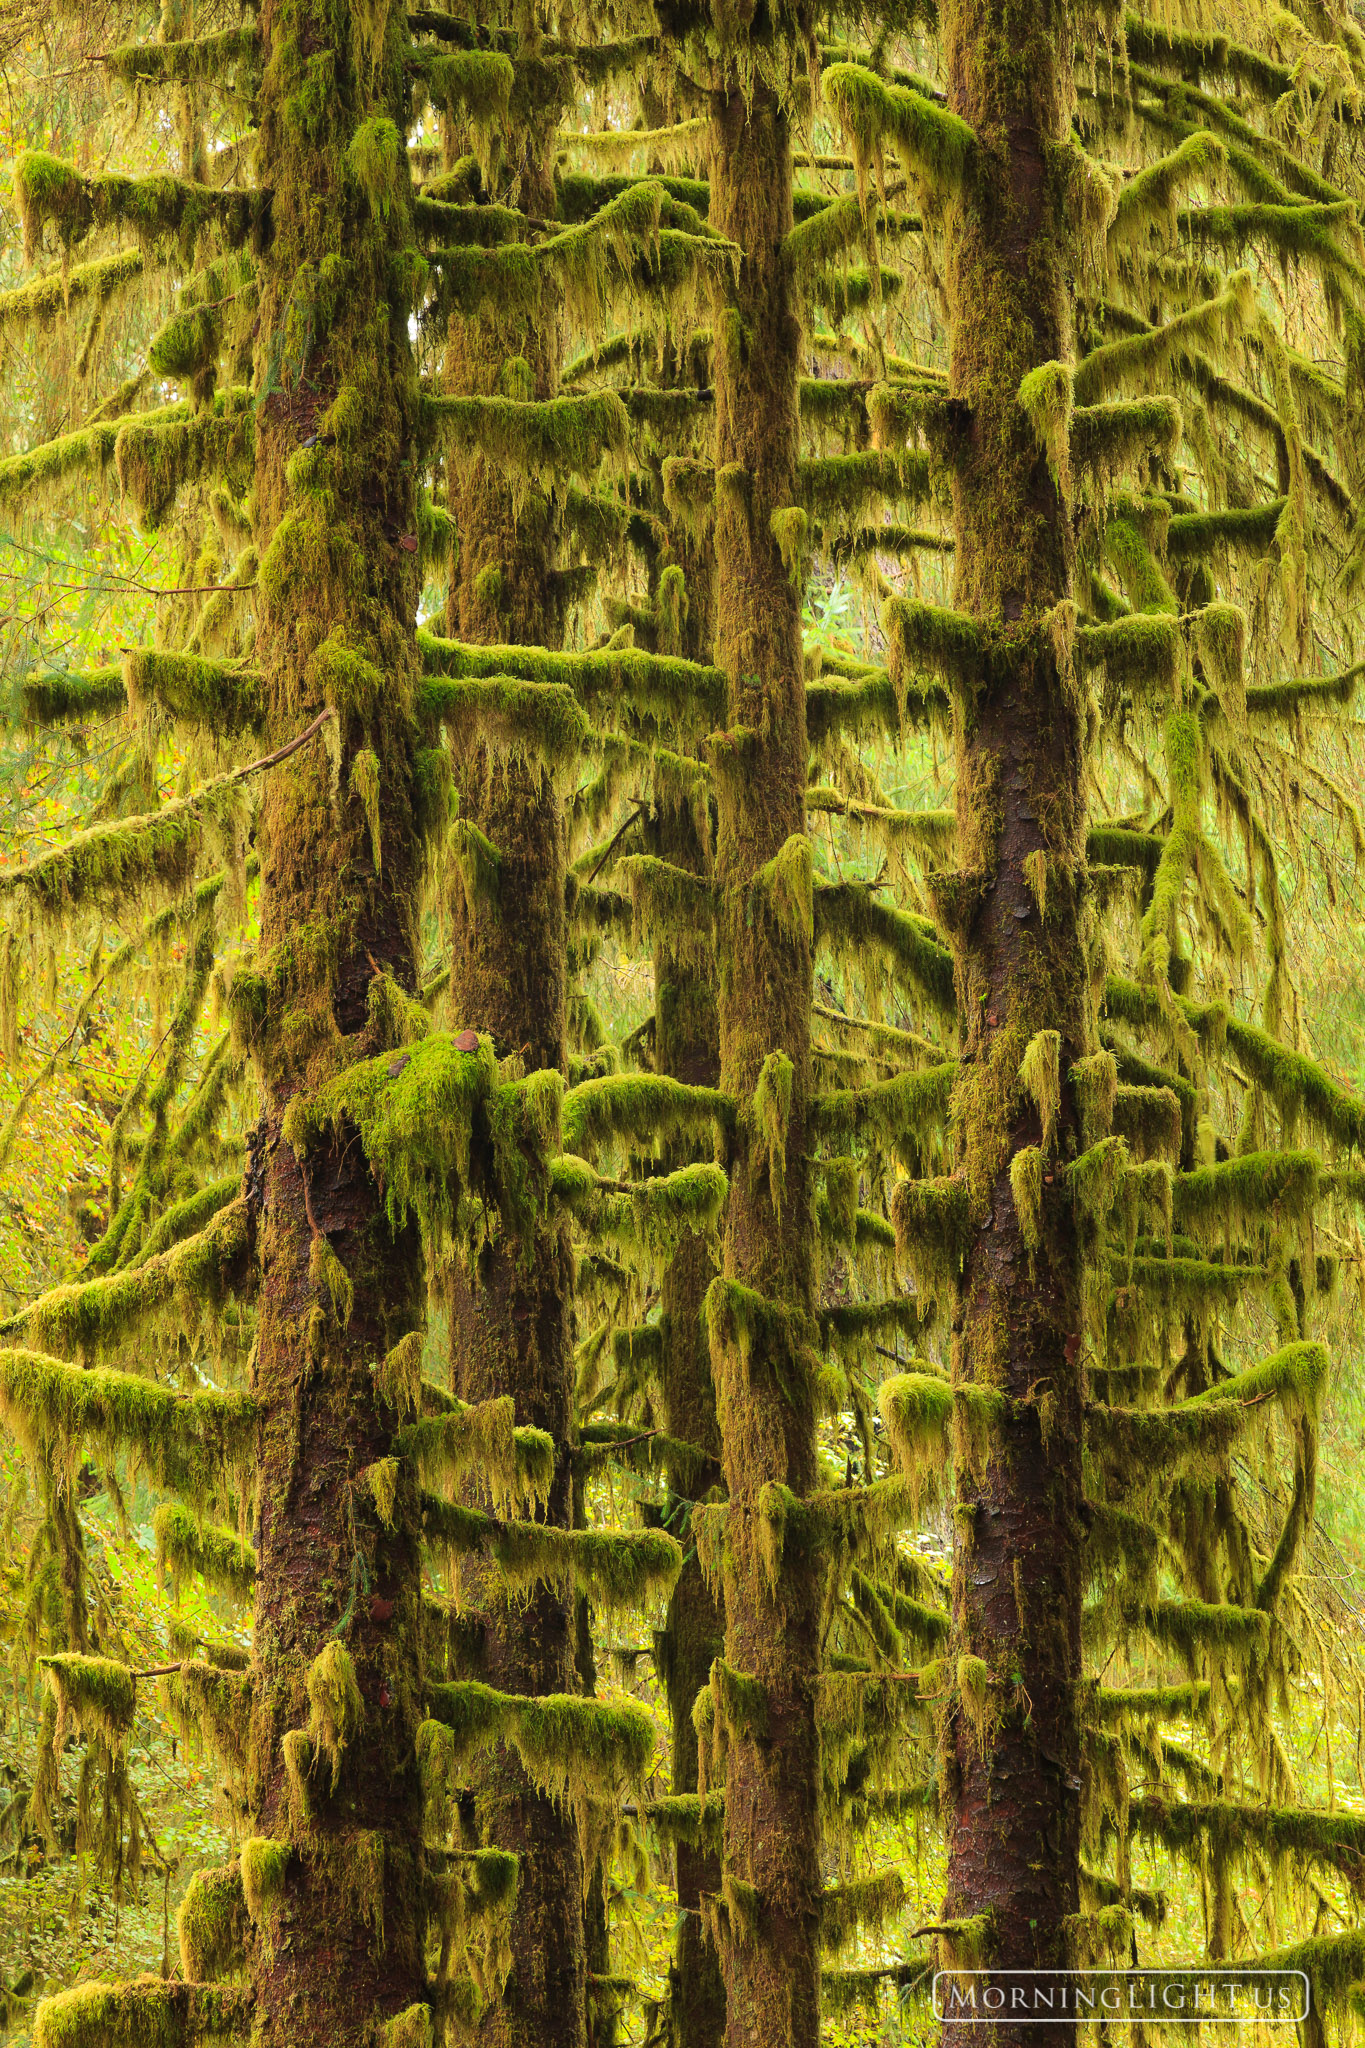 The tall trees of the Hoh Rainforest in Olympic National Park are all covered in thick moss. This stand of trees had the most...